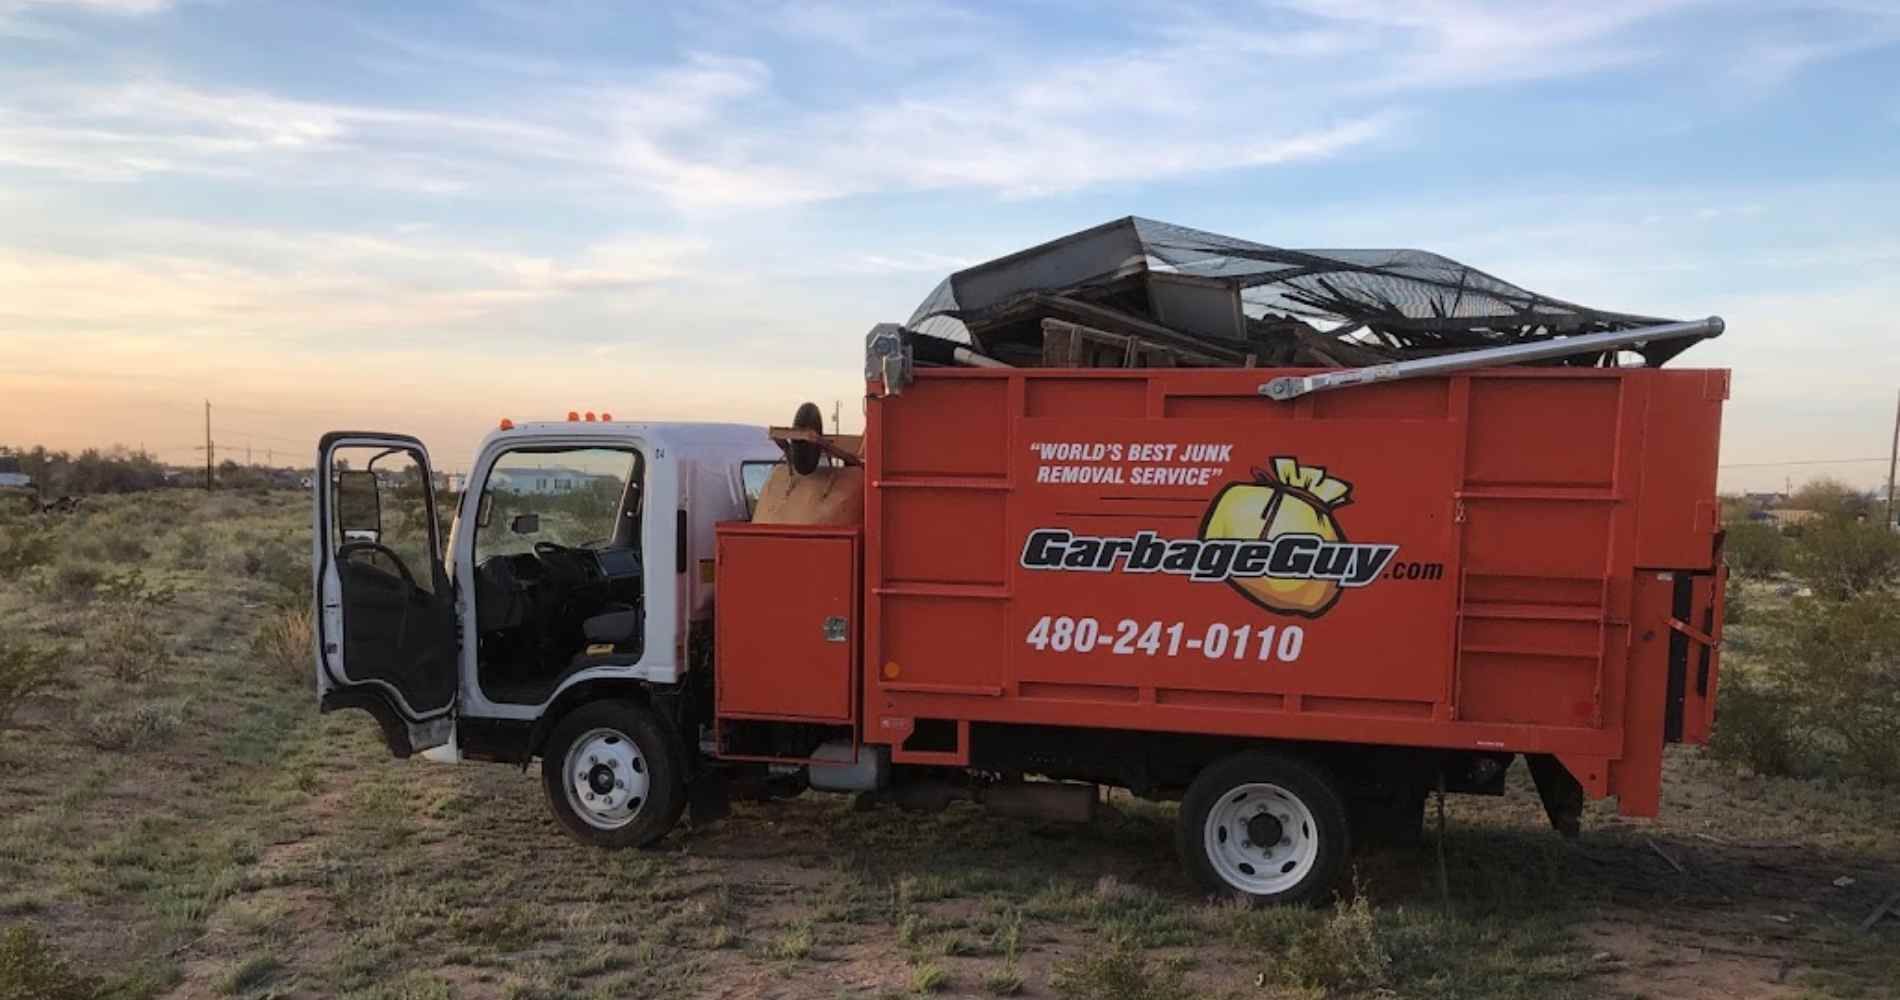 #1 for Junk Removal in Peoria, AZ with Over 1200 5-Star Reviews!